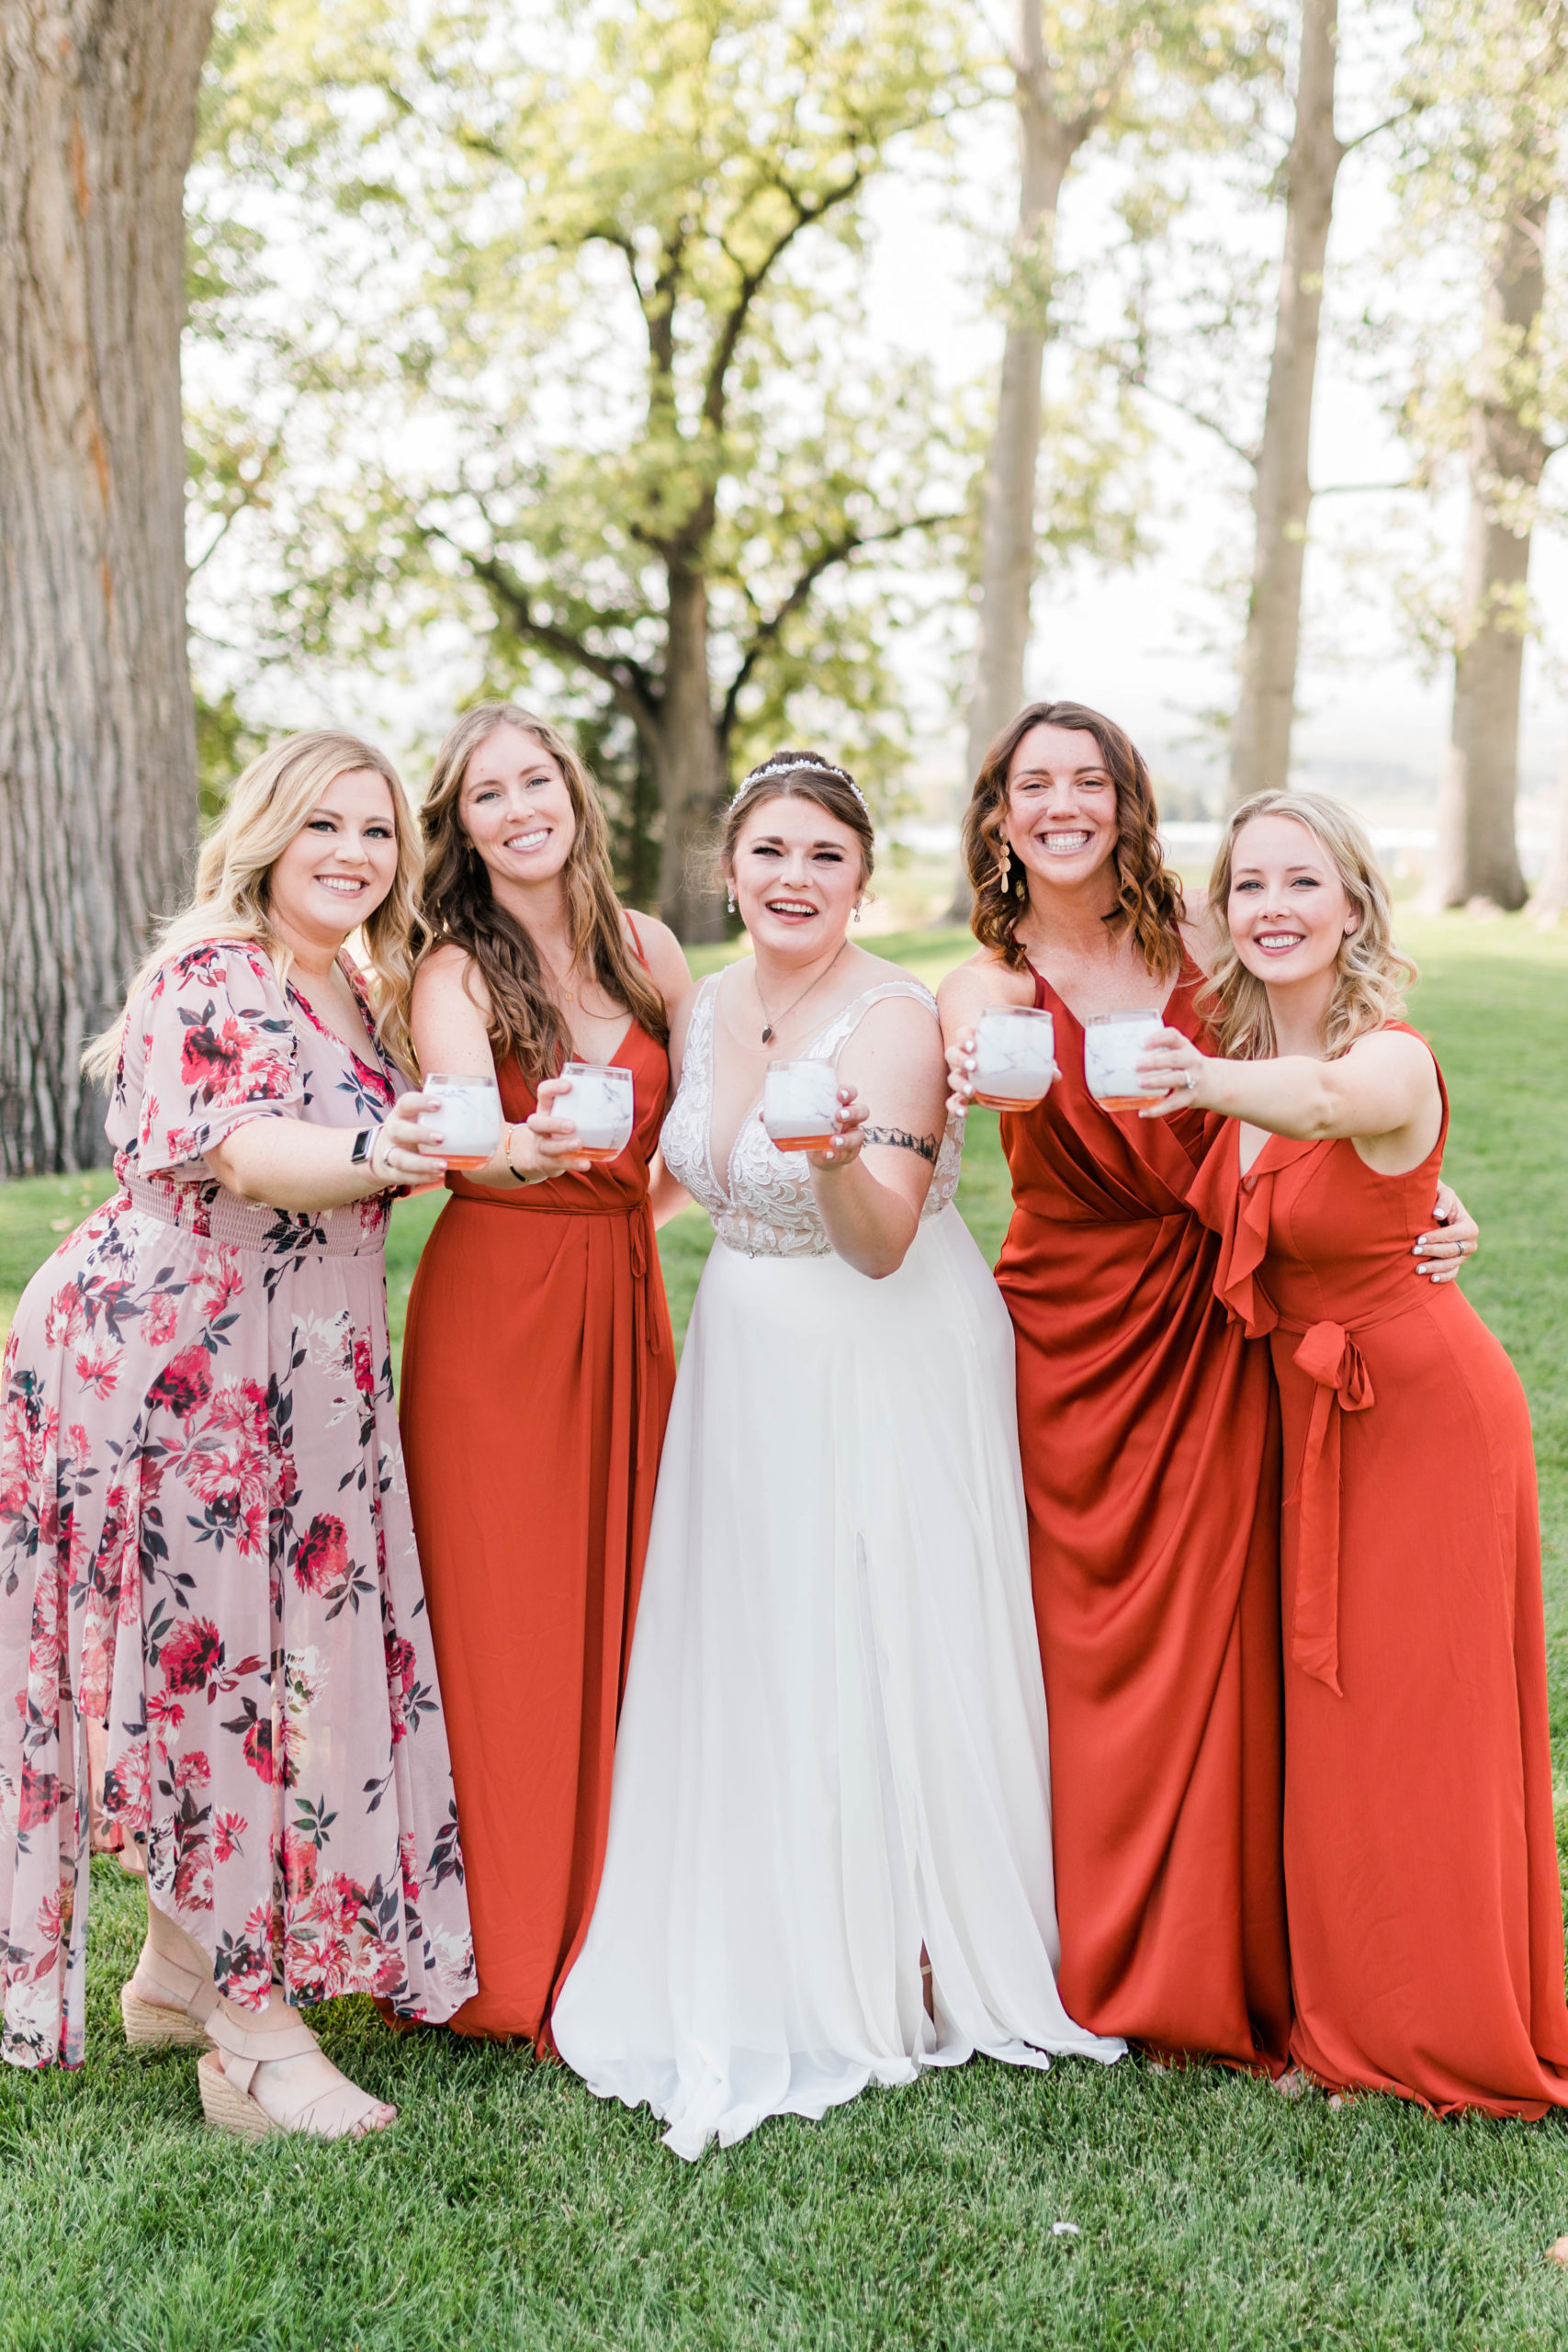 bride with her bridesmaids who are wearing a bright orange dress toasting their champagne together